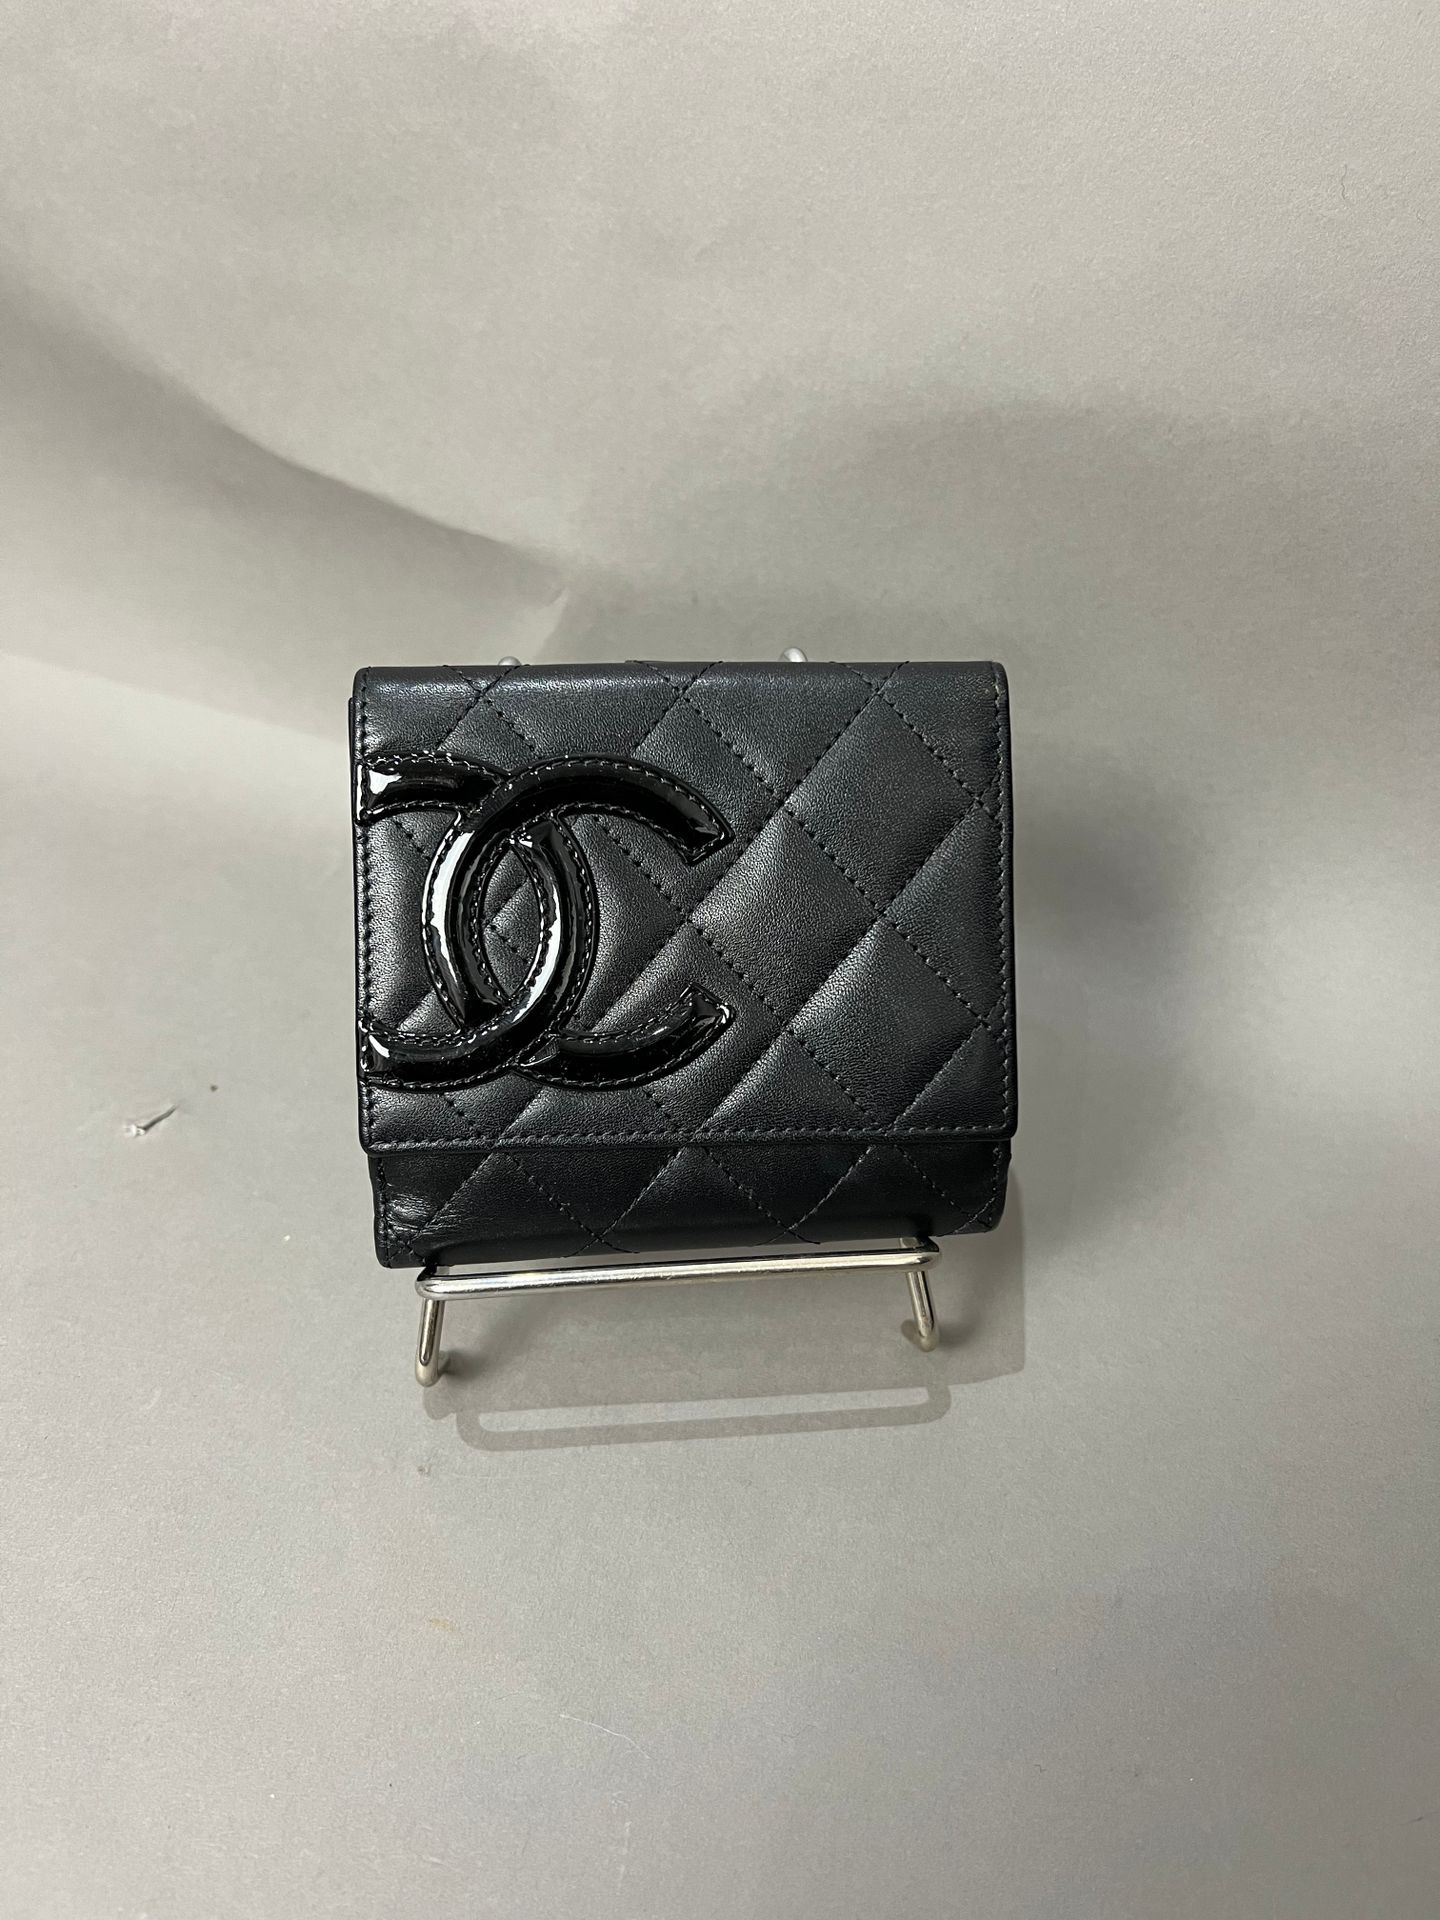 Wallet on chain double c leather crossbody bag Chanel Black in